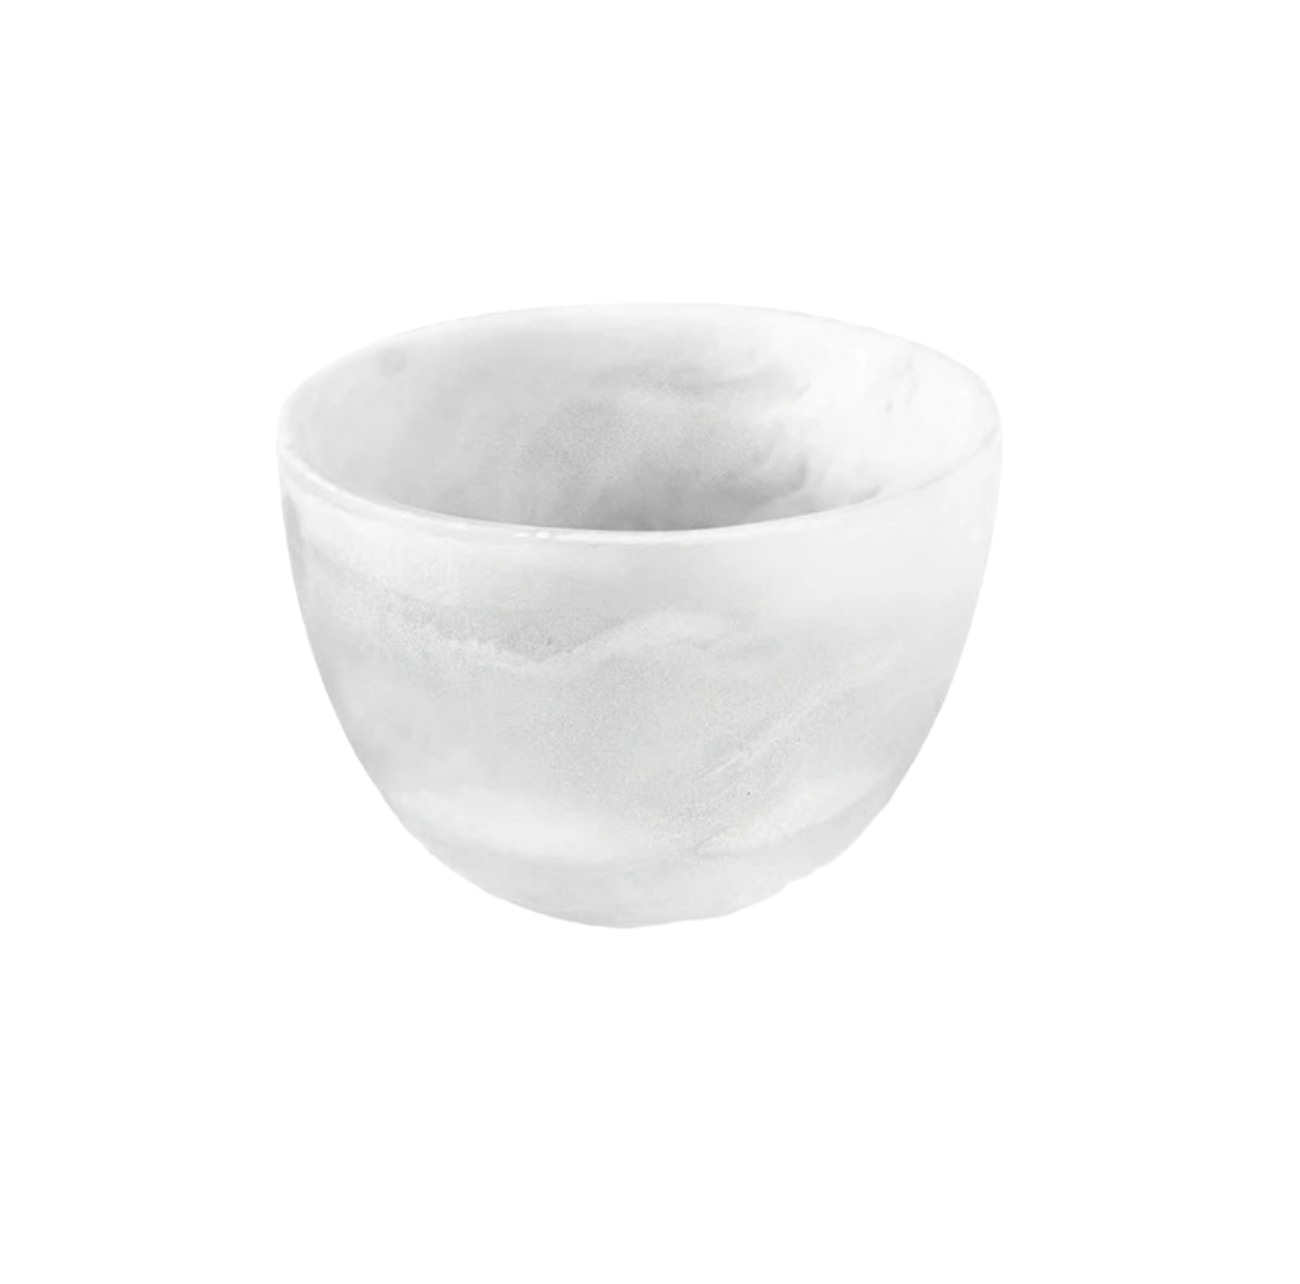 SMALL DEEP BOWL IN WHITE SWIRL